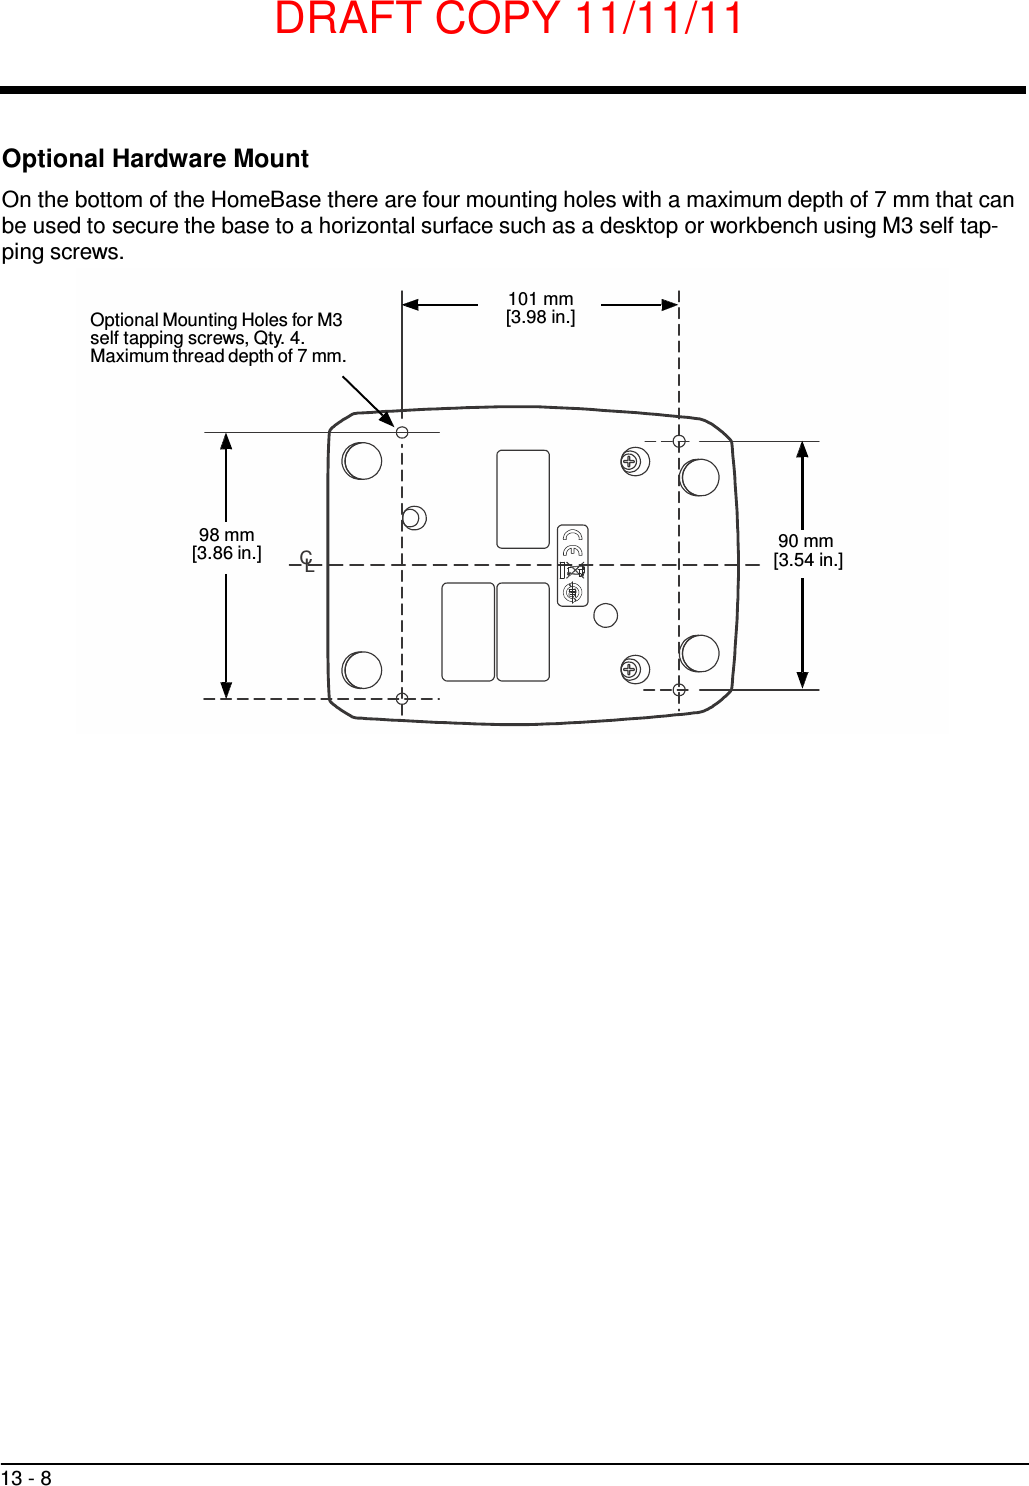 DRAFT COPY 11/11/11 13 - 8     Optional Hardware Mount  On the bottom of the HomeBase there are four mounting holes with a maximum depth of 7 mm that can be used to secure the base to a horizontal surface such as a desktop or workbench using M3 self tap- ping screws.   Optional Mounting Holes for M3 self tapping screws, Qty. 4. Maximum thread depth of 7 mm. 101 mm [3.98 in.]         98 mm [3.86 in.]  CL 90 mm [3.54 in.] 